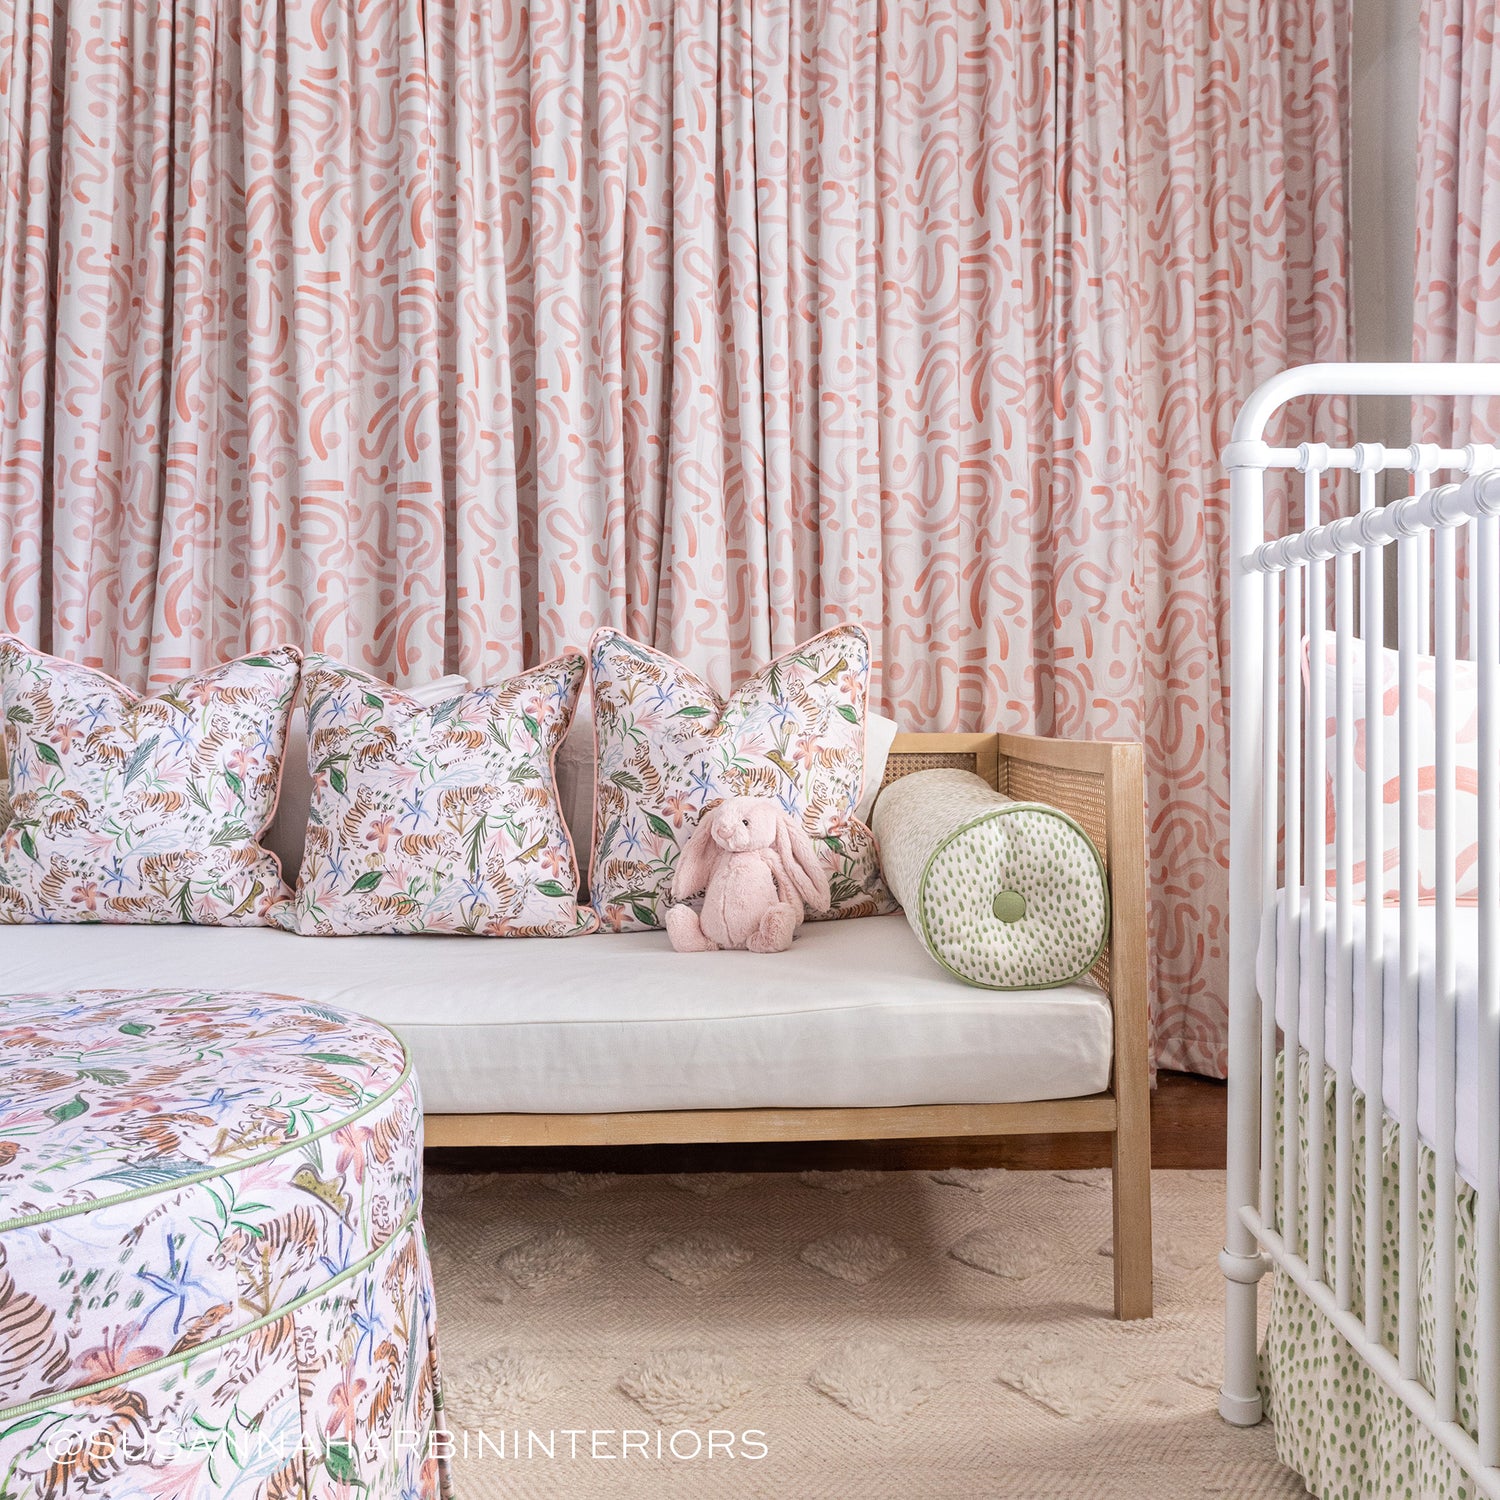 Nursery room corner styled with Pink Chinoiserie Tiger Printed Pillows on wooden bench with white mattress matching with a Pink Chinoiserie Tiger Printed Ottoman with Pink Graphic Printed Curtains. Photo taken by Susanna Harbin Interiors